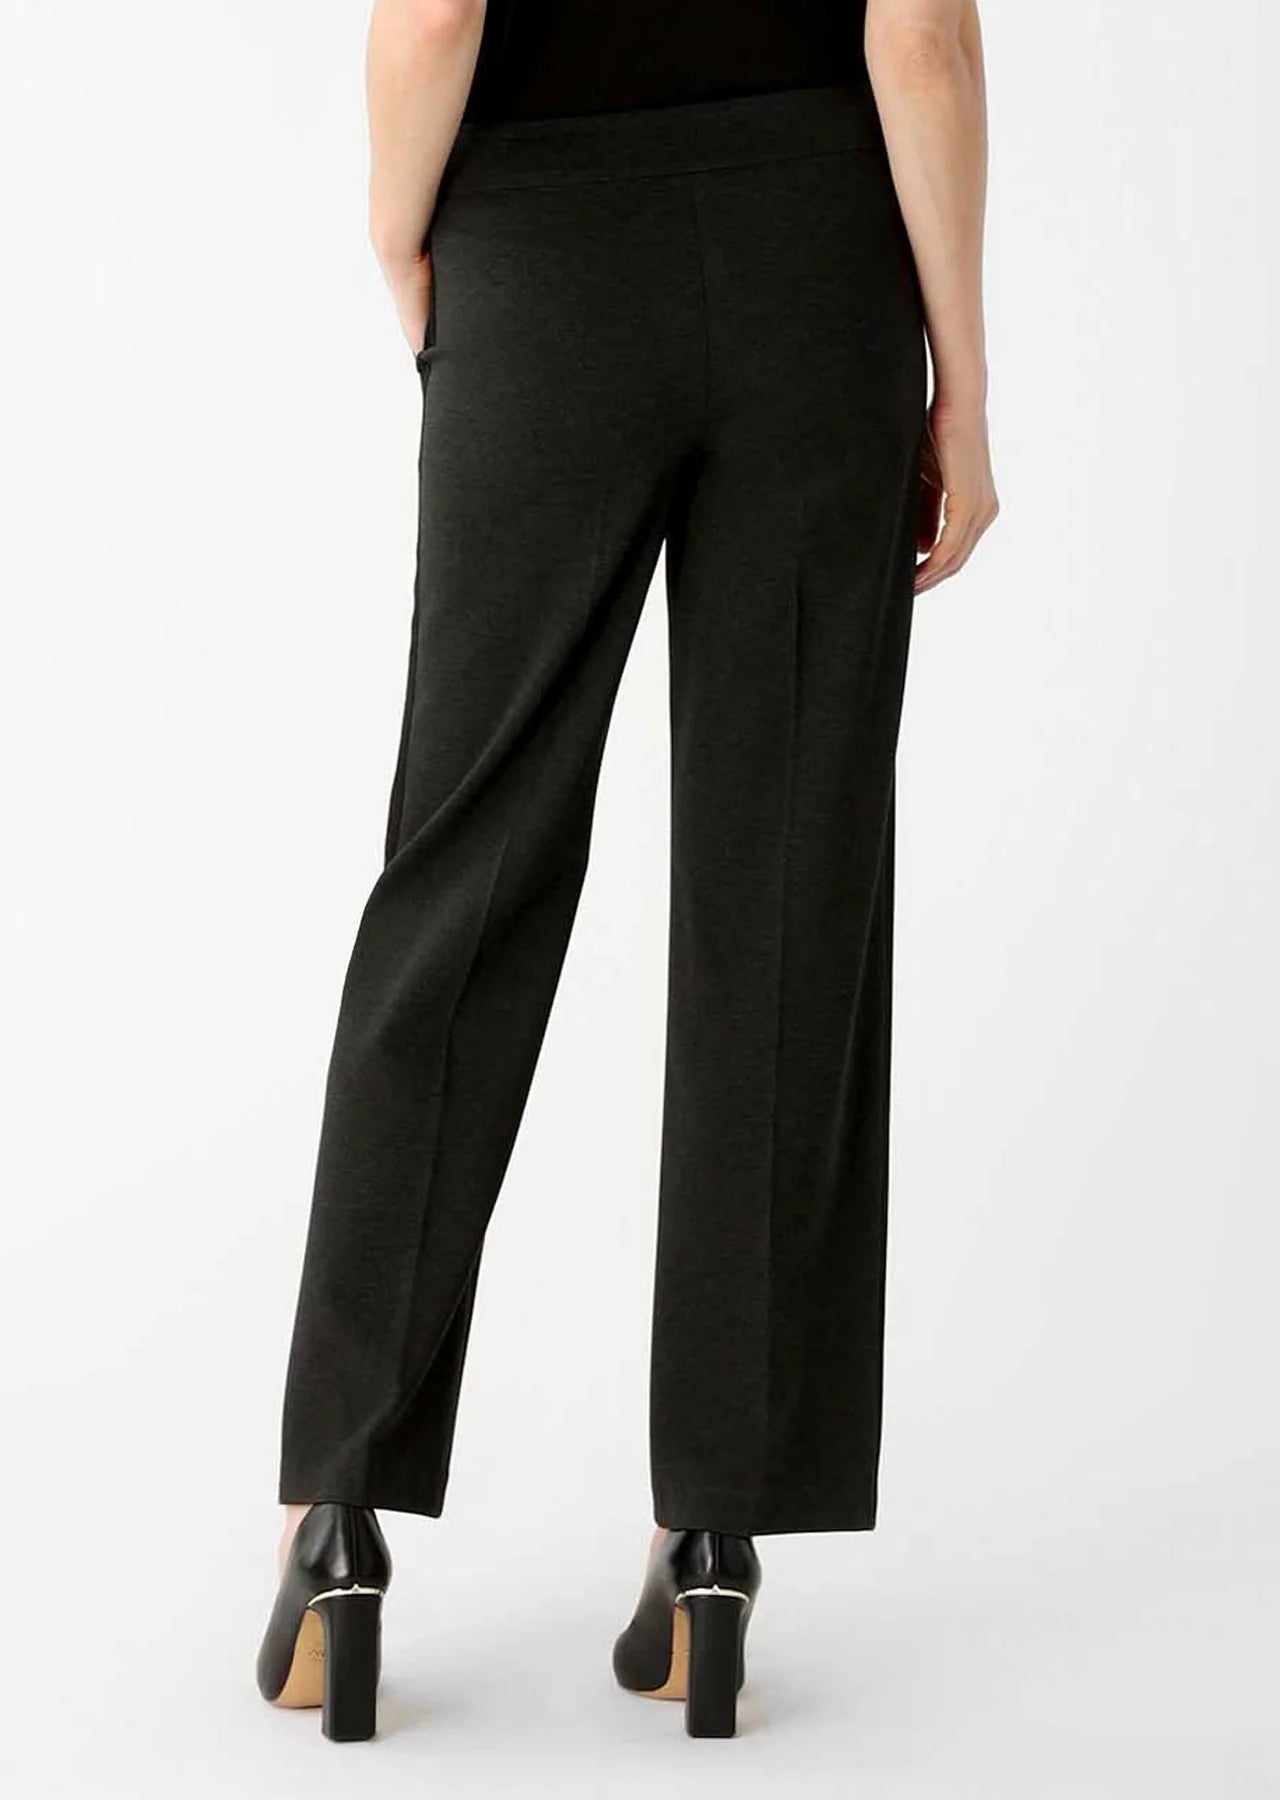 Maeve Hollywood Tailored Trousers | Anthropologie